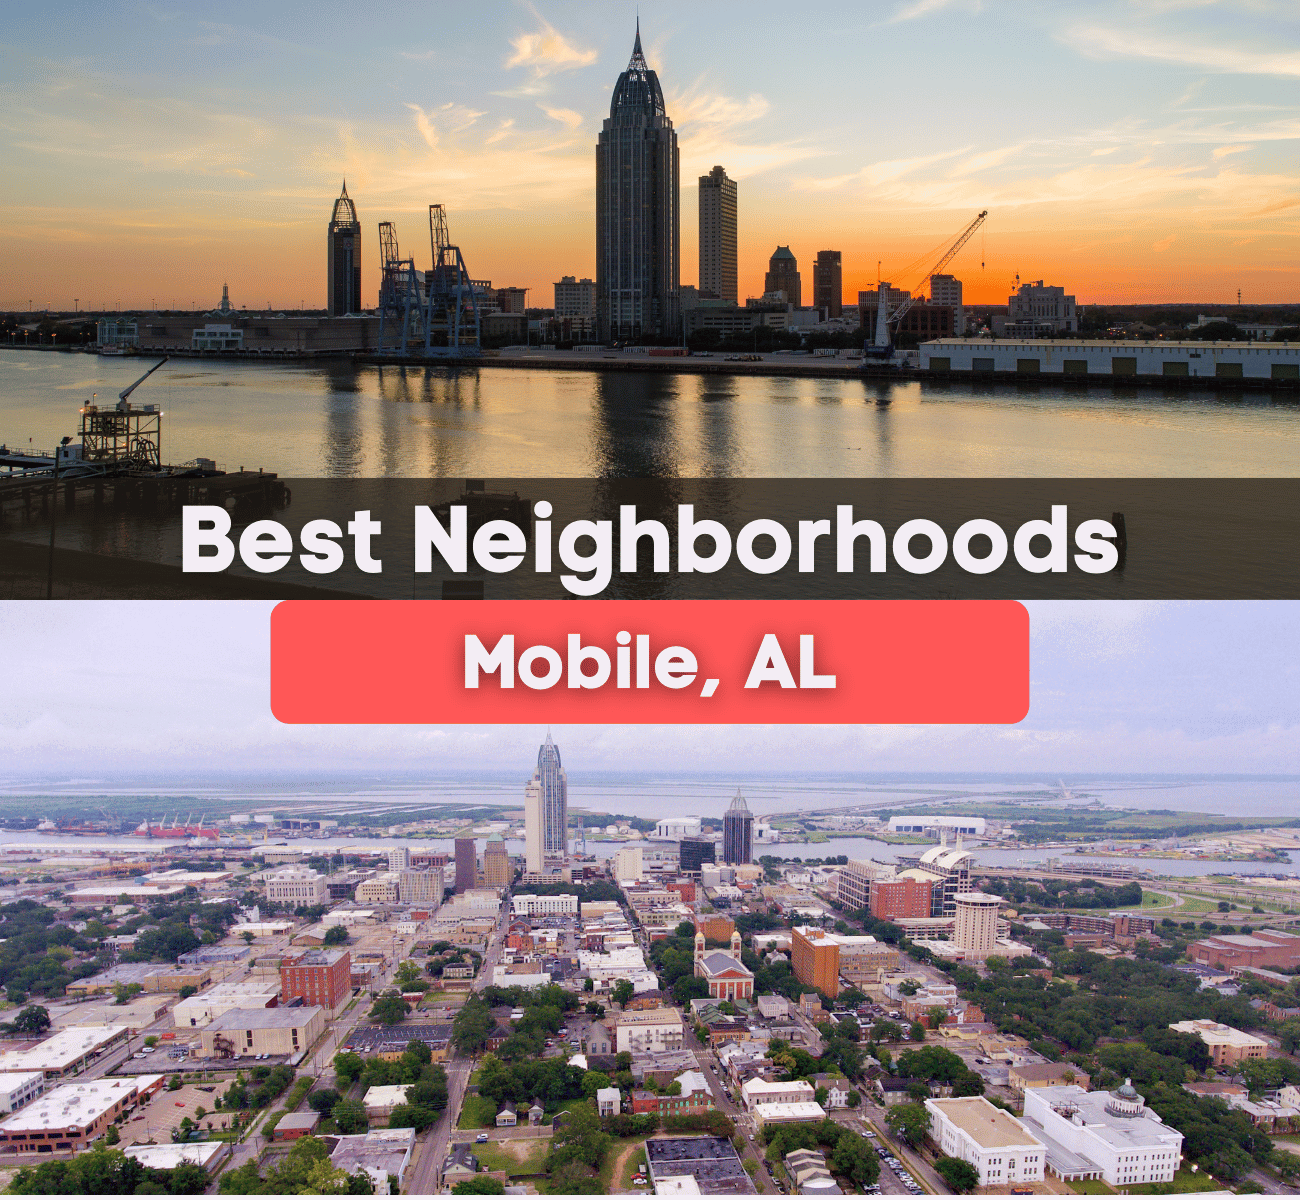 best neighborhoods in Mobile, AL graphic - mobile, AL city near the water during sunset